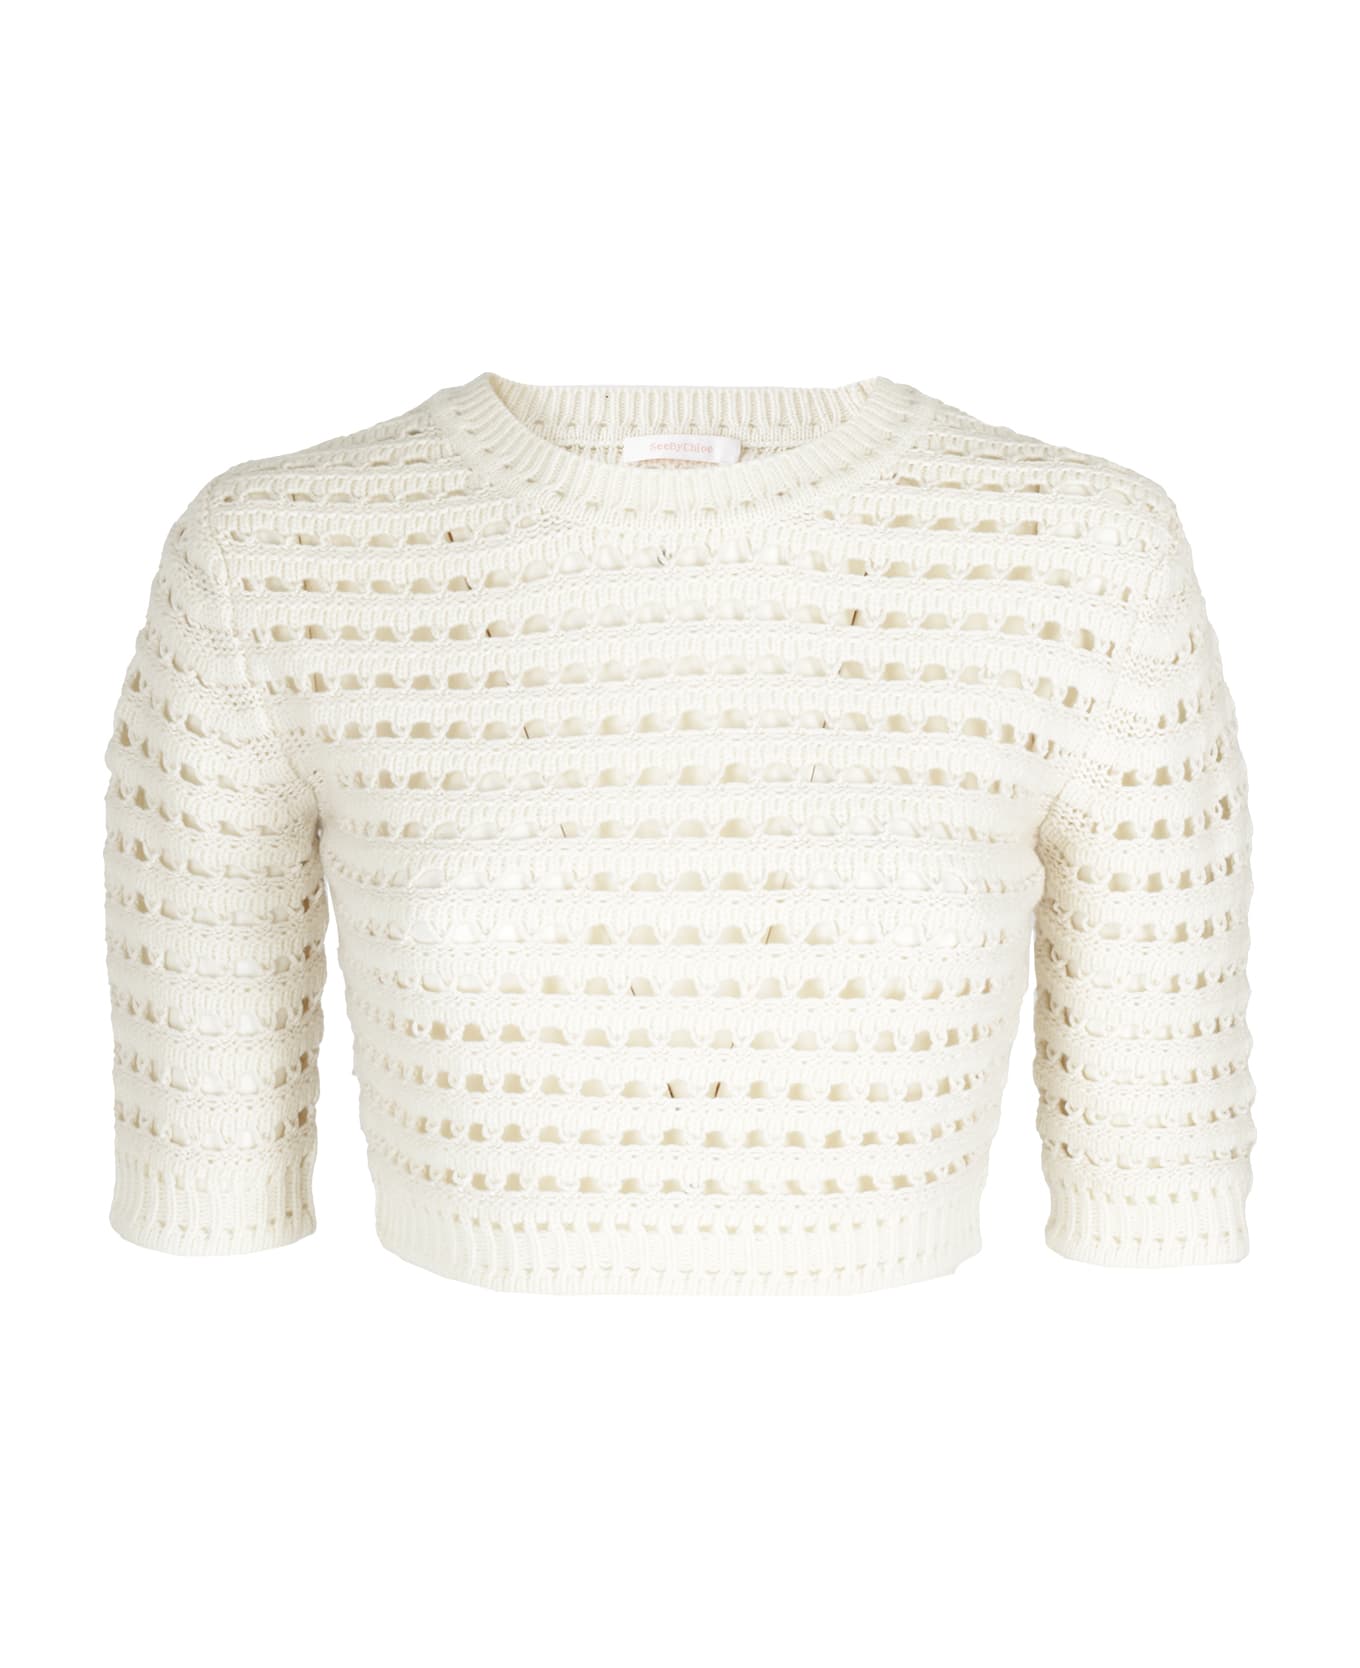 See by Chloé Top - White